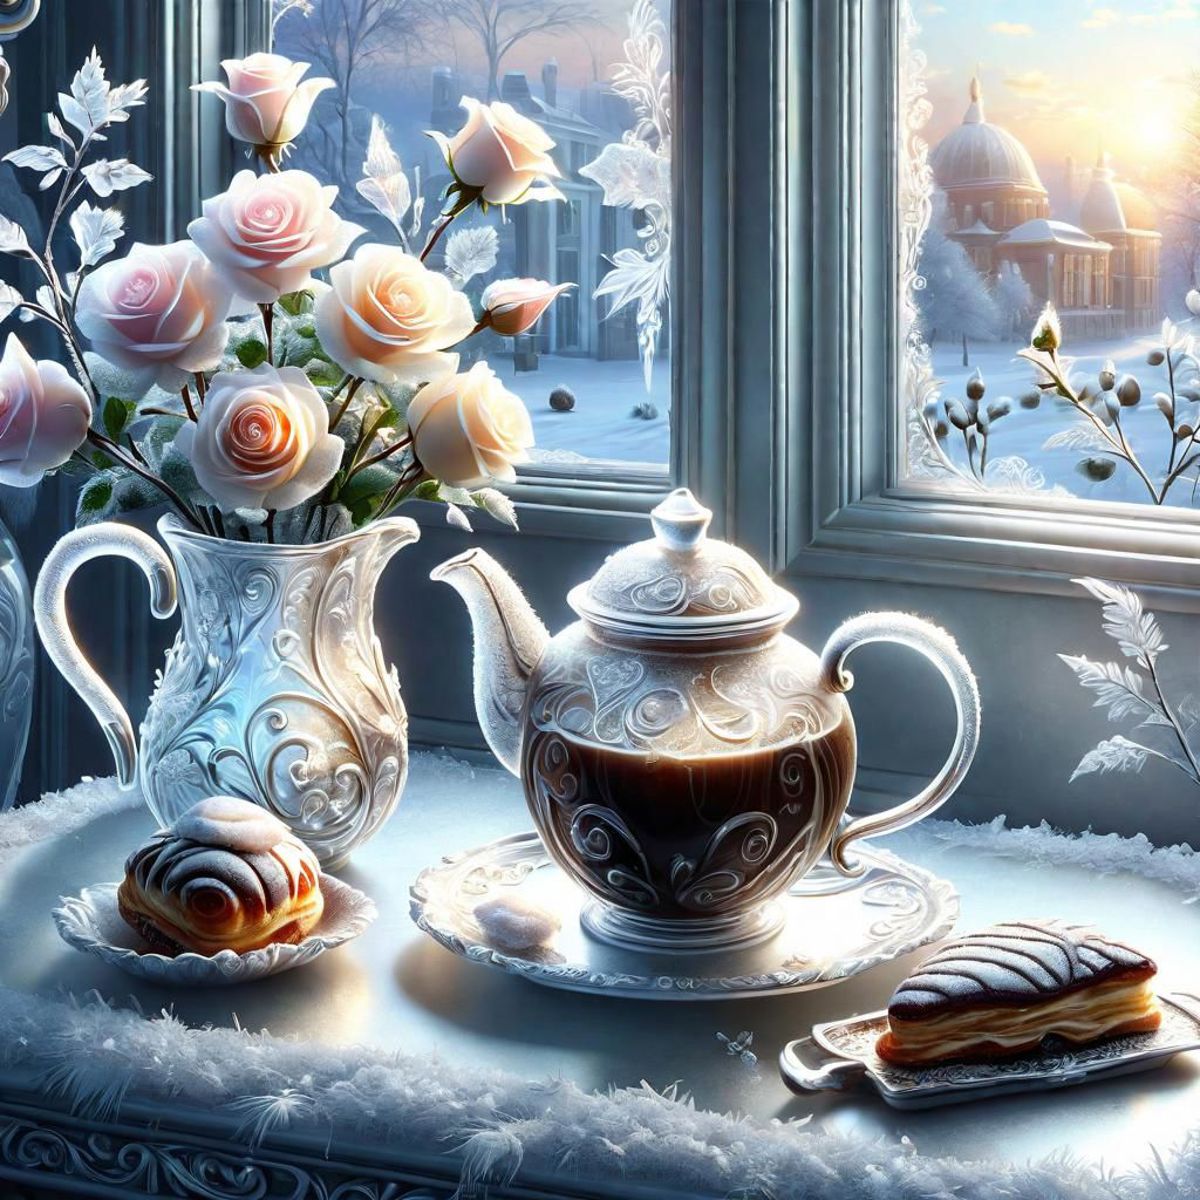 A Silver Tea Set with Pink Roses and Pastries on a Snowy Table